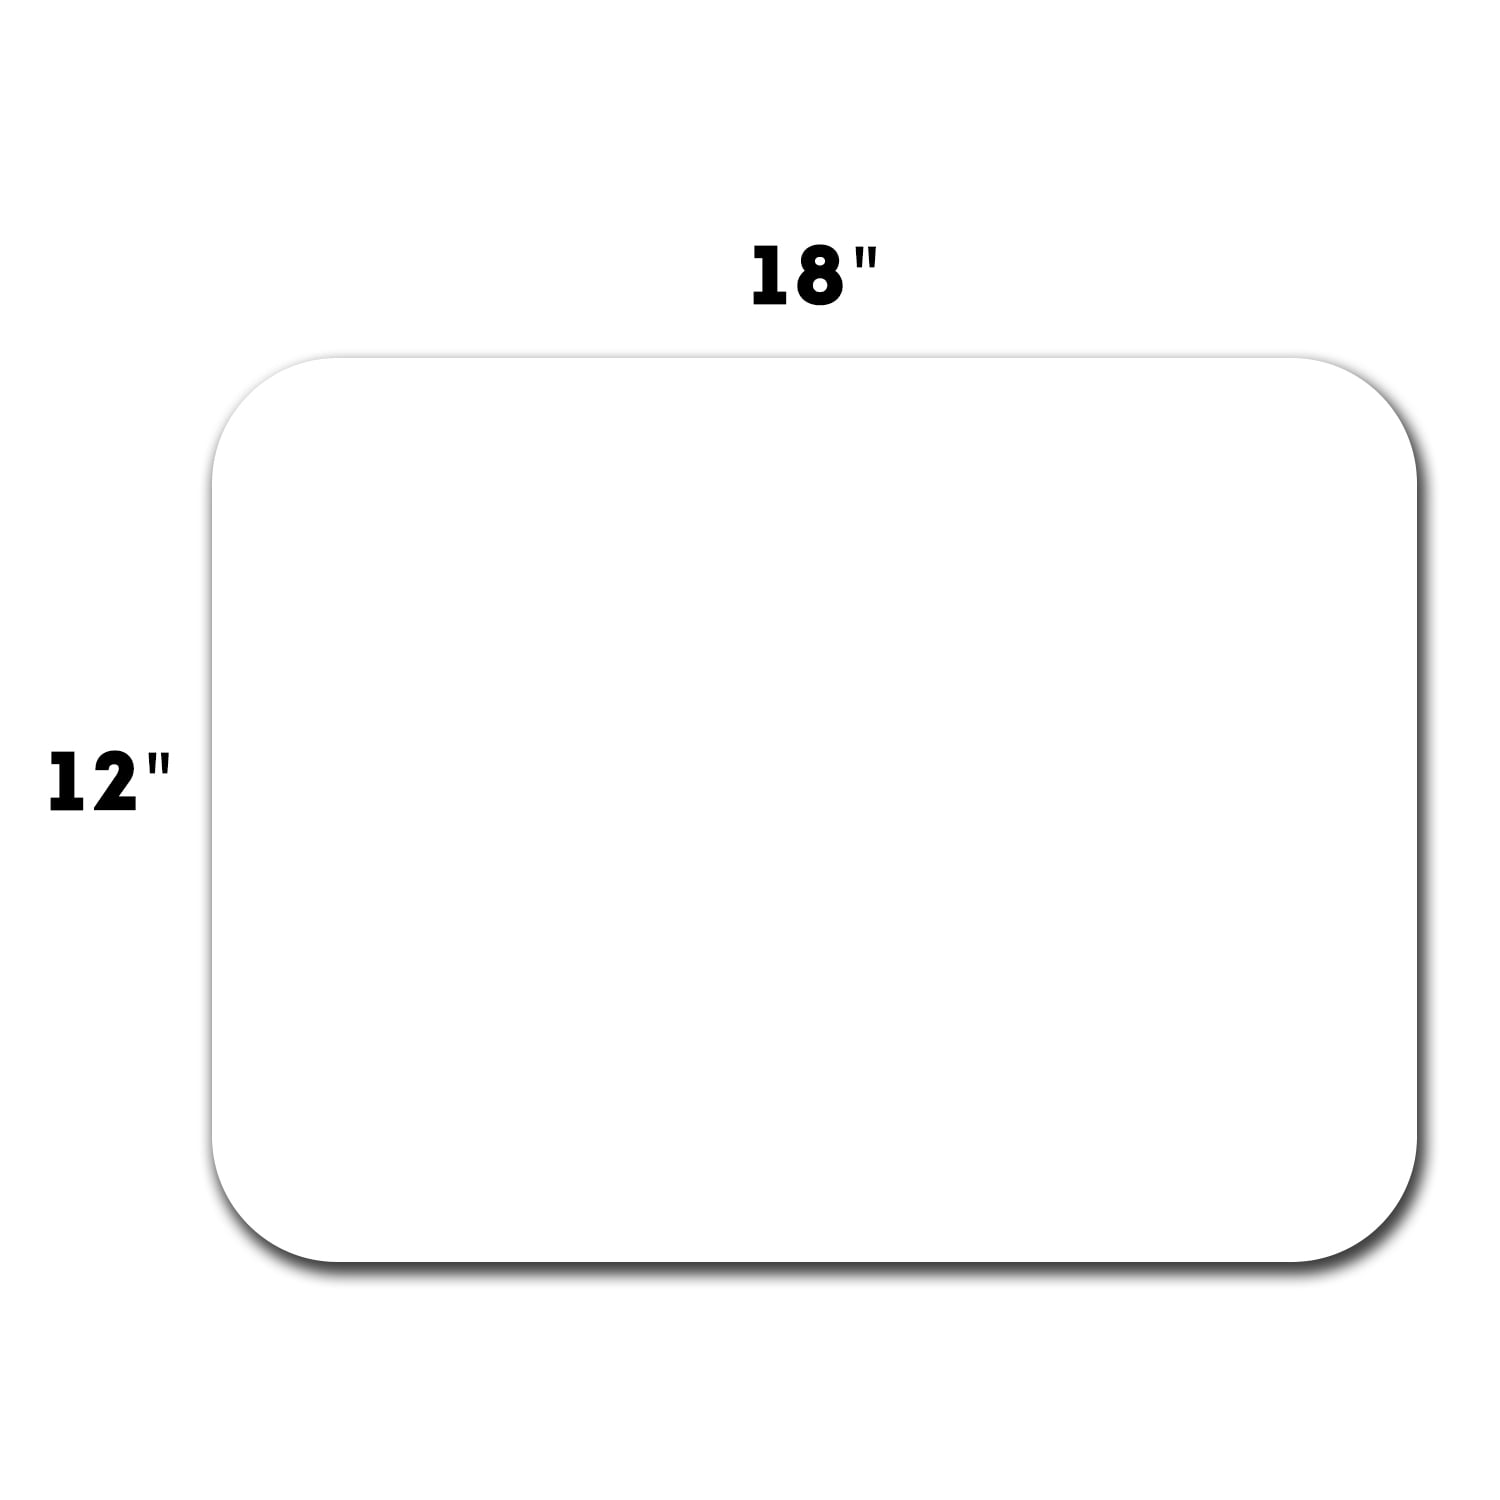 2 Pack of 18 inchx12 inch Blank Magnets with Rounded Corners, White, Commercial or Marketing Vehicles/Cars, Size: Medium